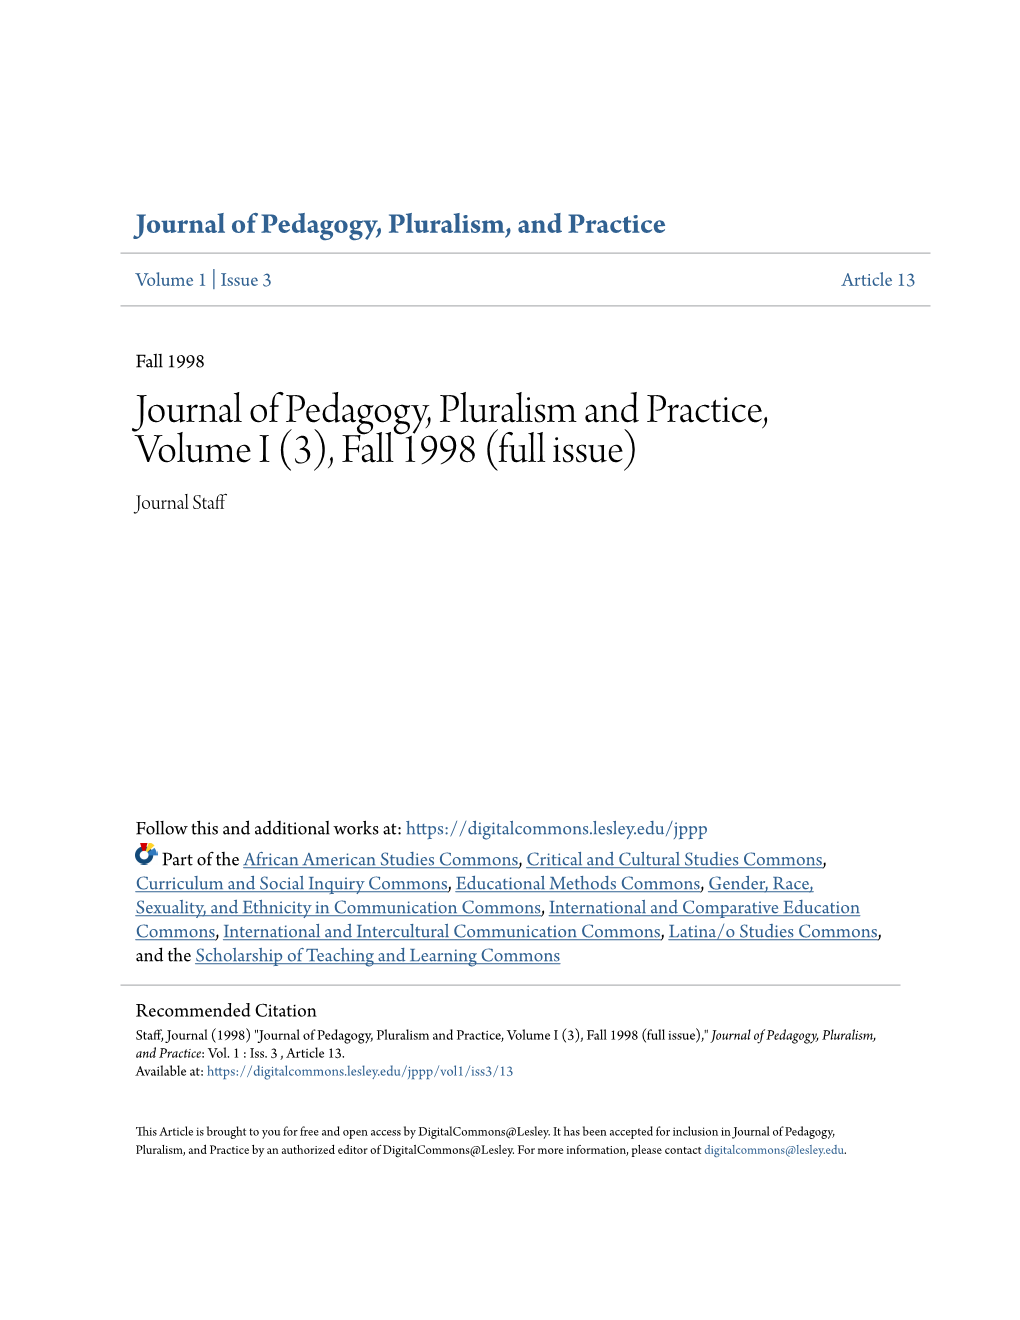 Journal of Pedagogy, Pluralism and Practice, Volume I (3), Fall 1998 (Full Issue) Journal Staff